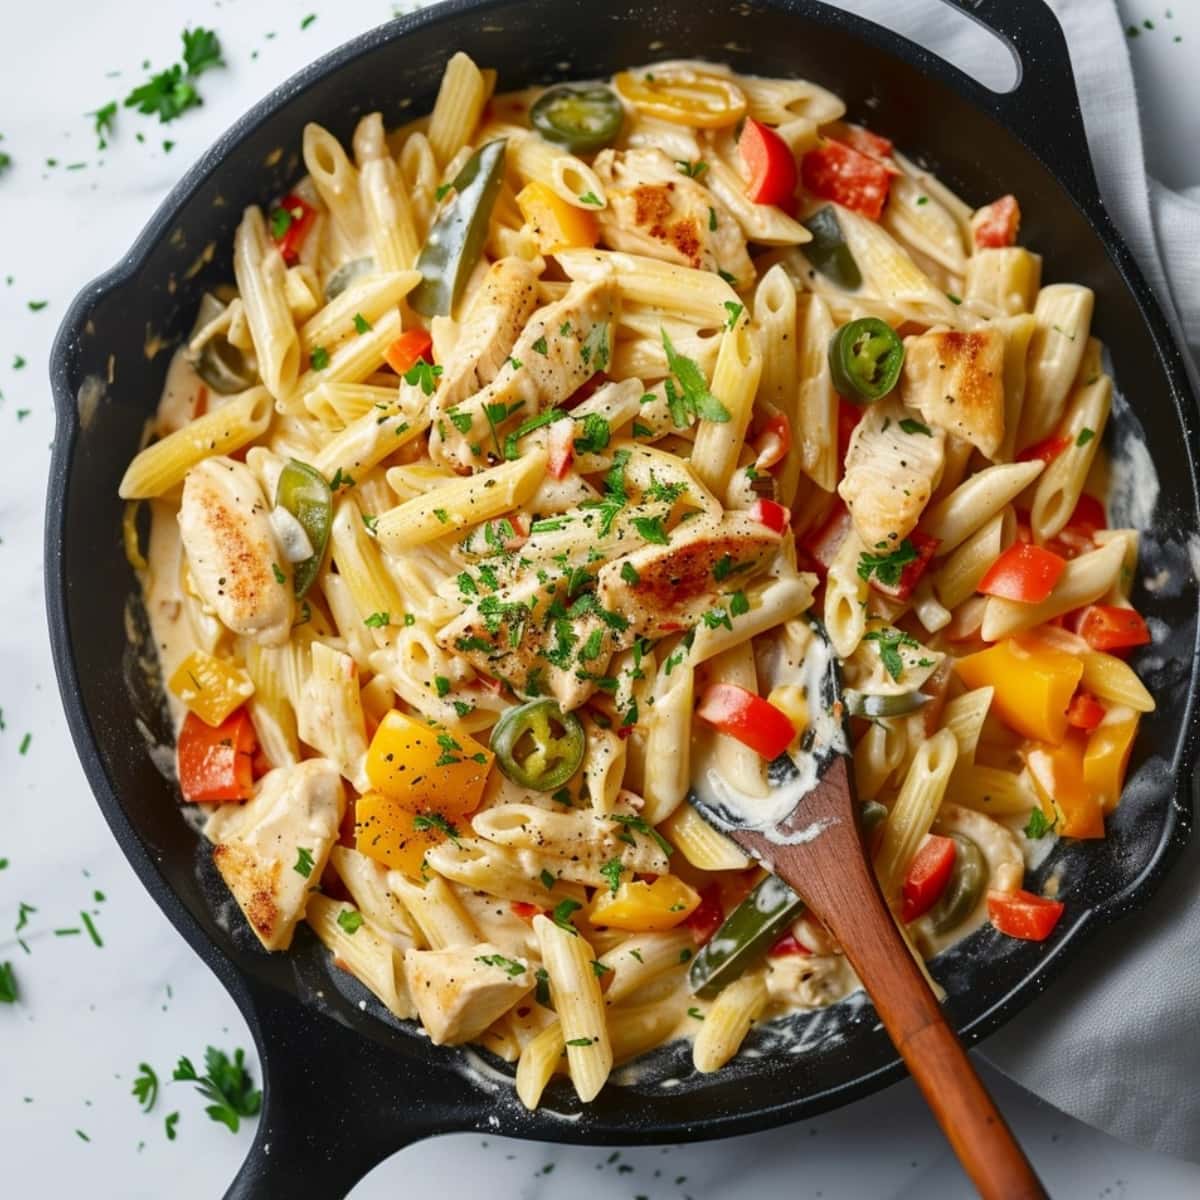 Rattlesnake pasta with chicken, bell peppers, spicy jalapeños, and creamy Parmesan sauce in cast iron skillet.